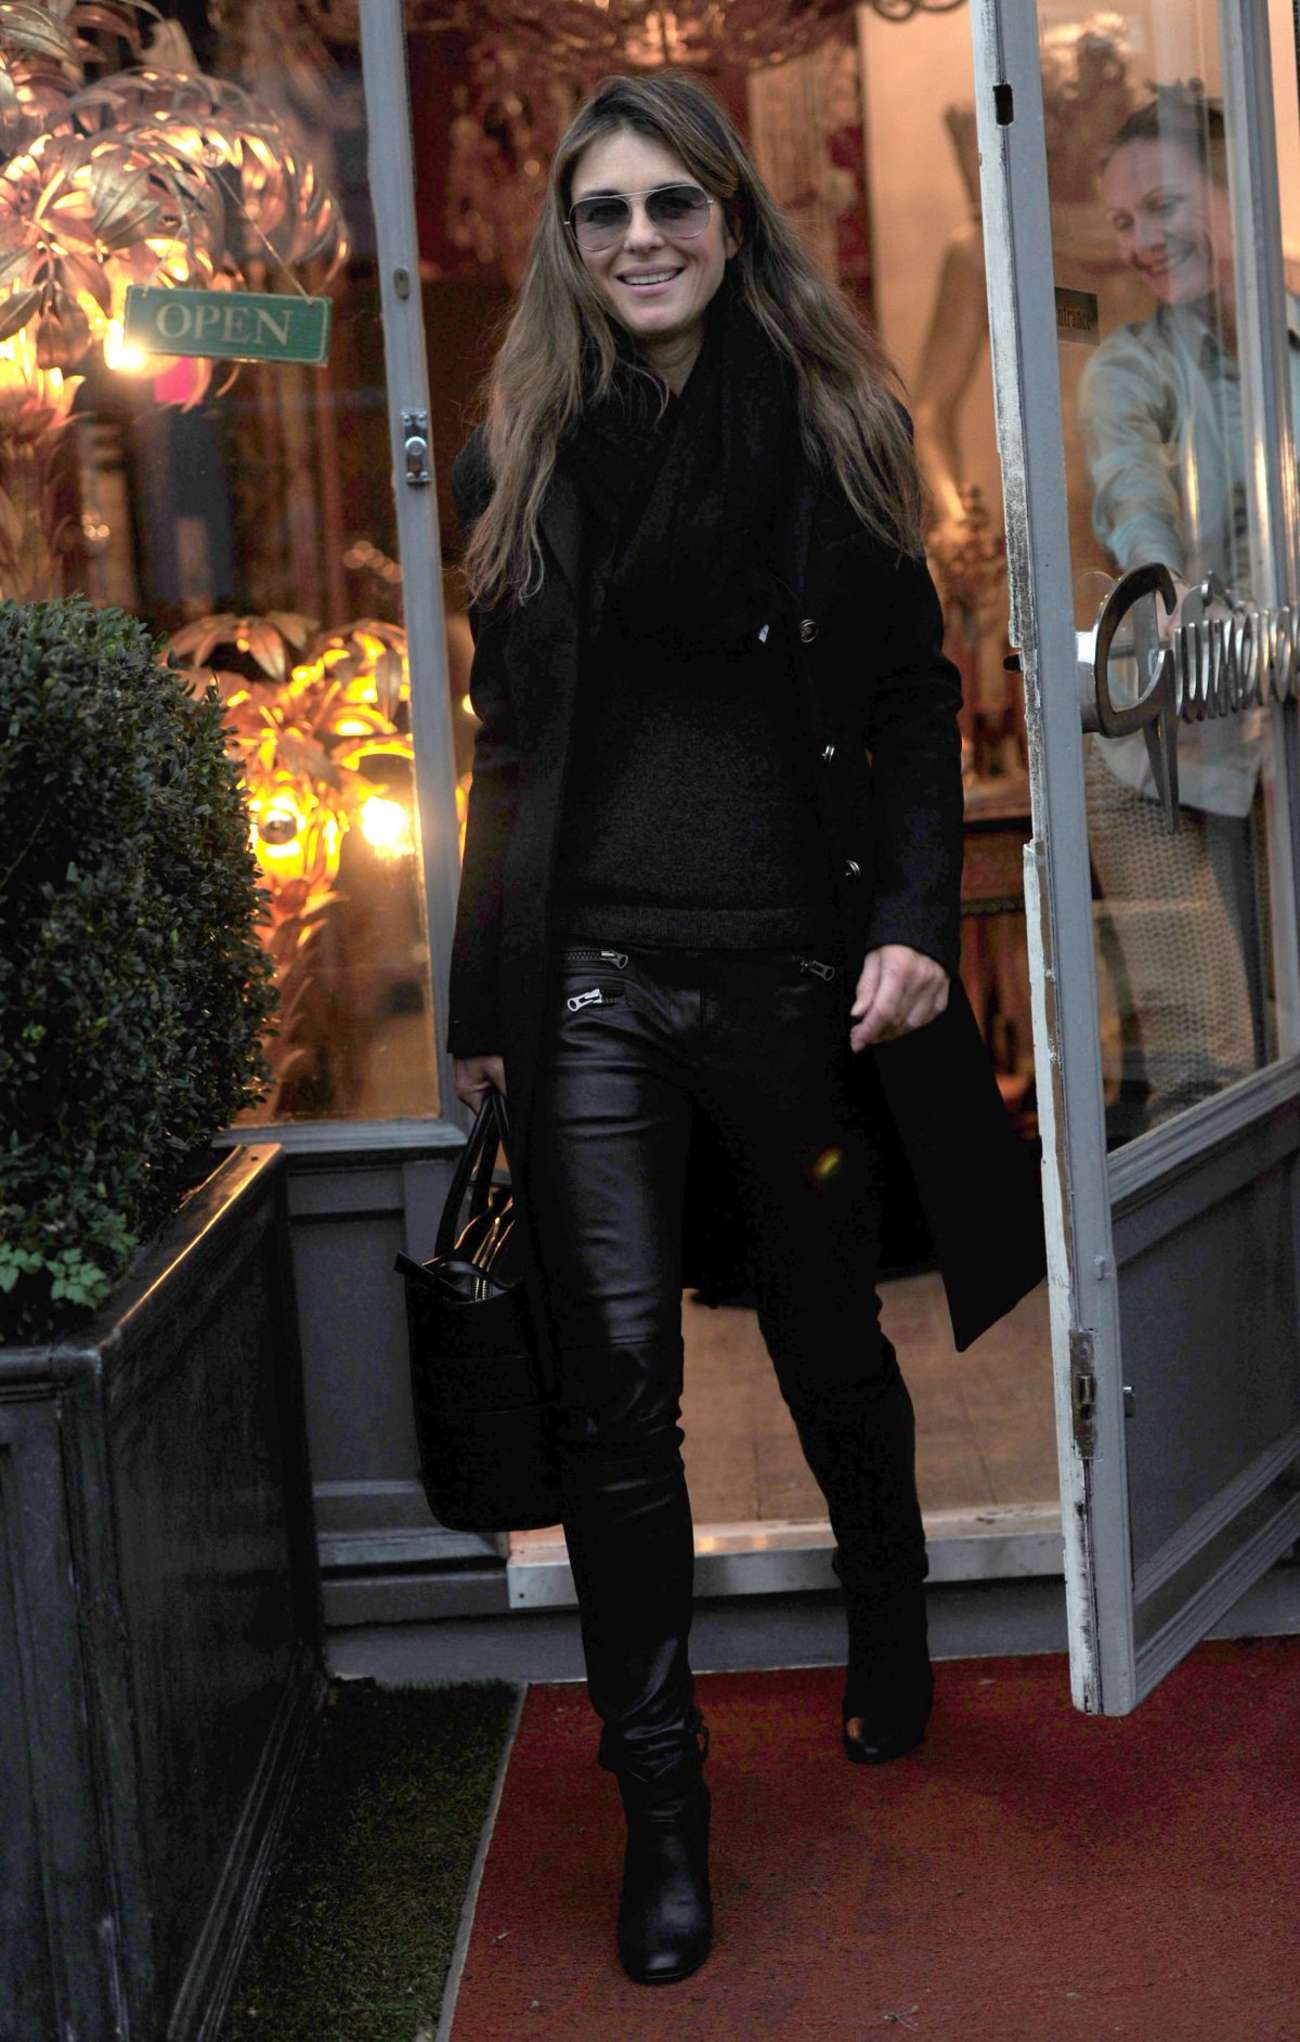 Elizabeth Hurley shopping for antiques in London